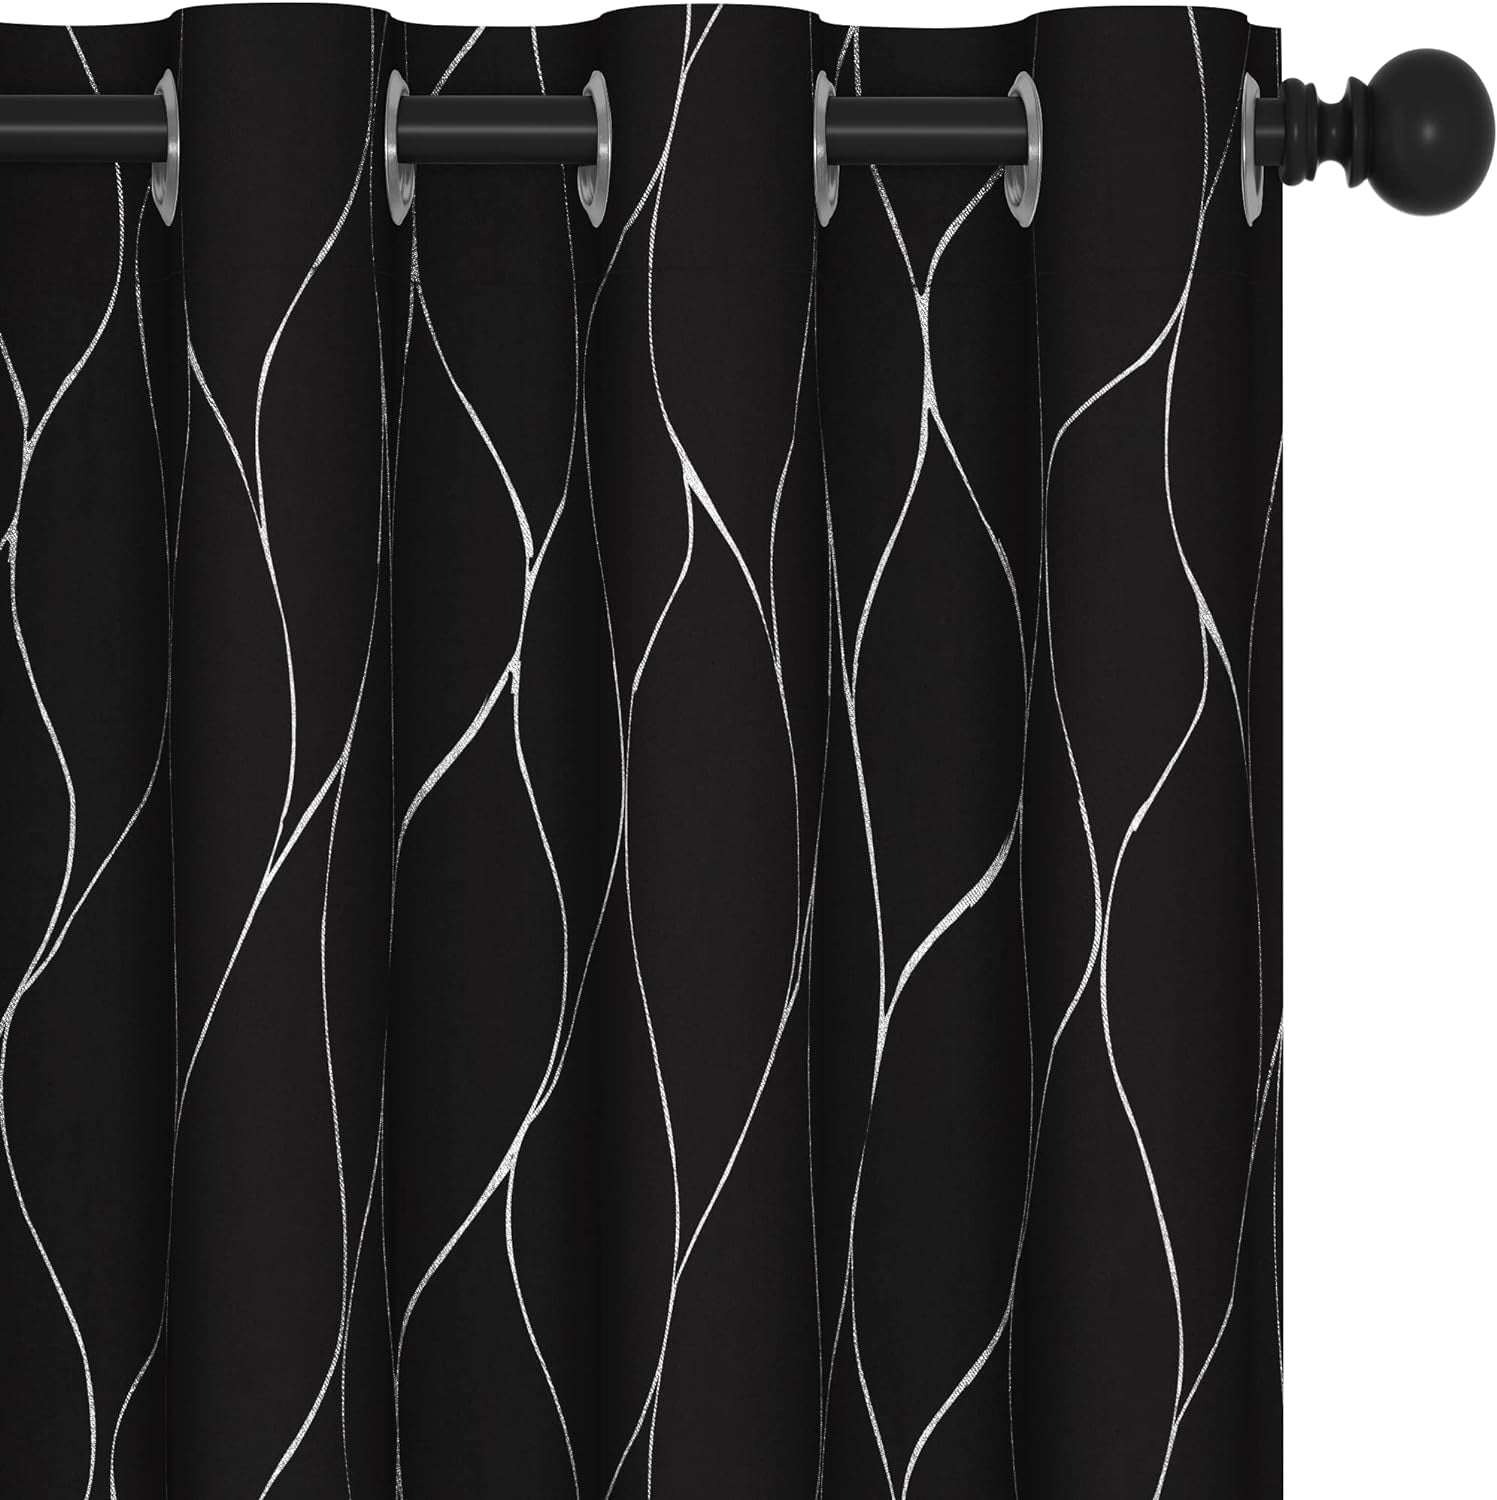 Deconovo Blackout Curtains with Foil Wave Pattern, Grommet Curtain Room Darkening Window Panels, Thermal Insulated Curtain Drapes for Nursery Room (42W X 54L Inch, 2 Panels, Turquoise)  DECONOVO Black W52 X L72 